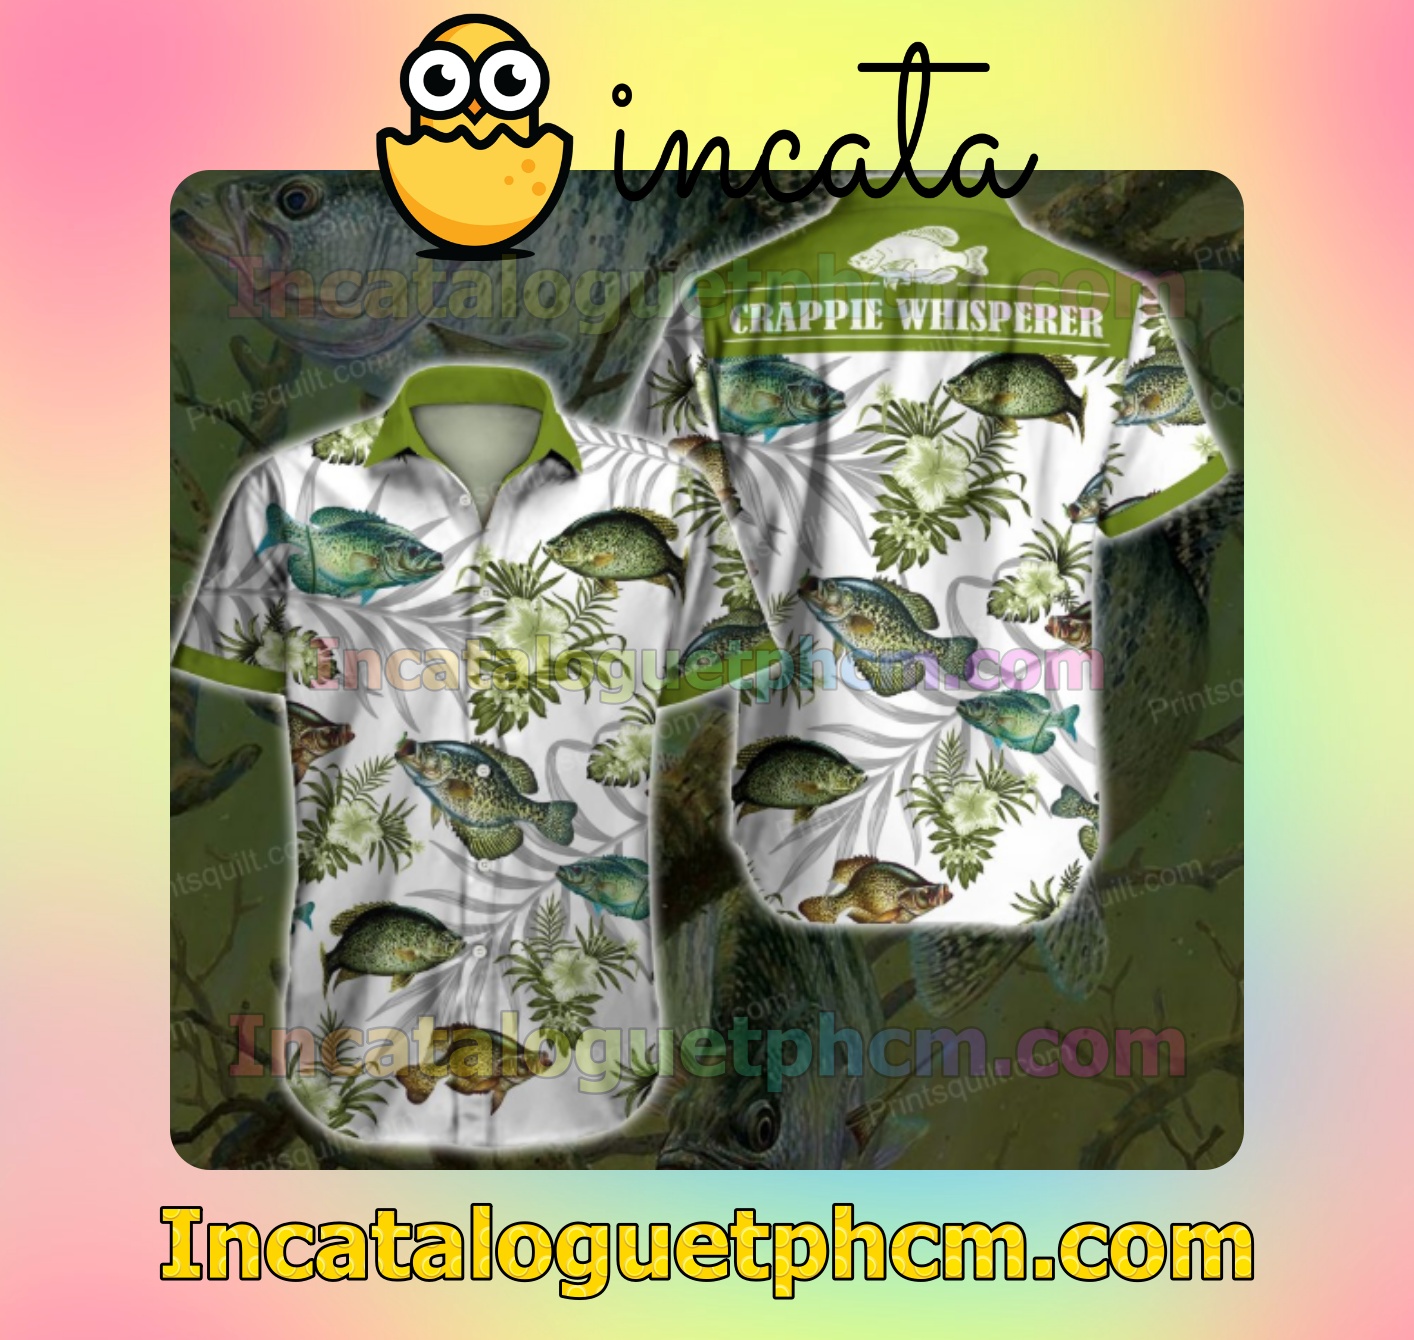 Crappie Whisperer Green Tropical Floral White Mens Short Sleeve Shirts